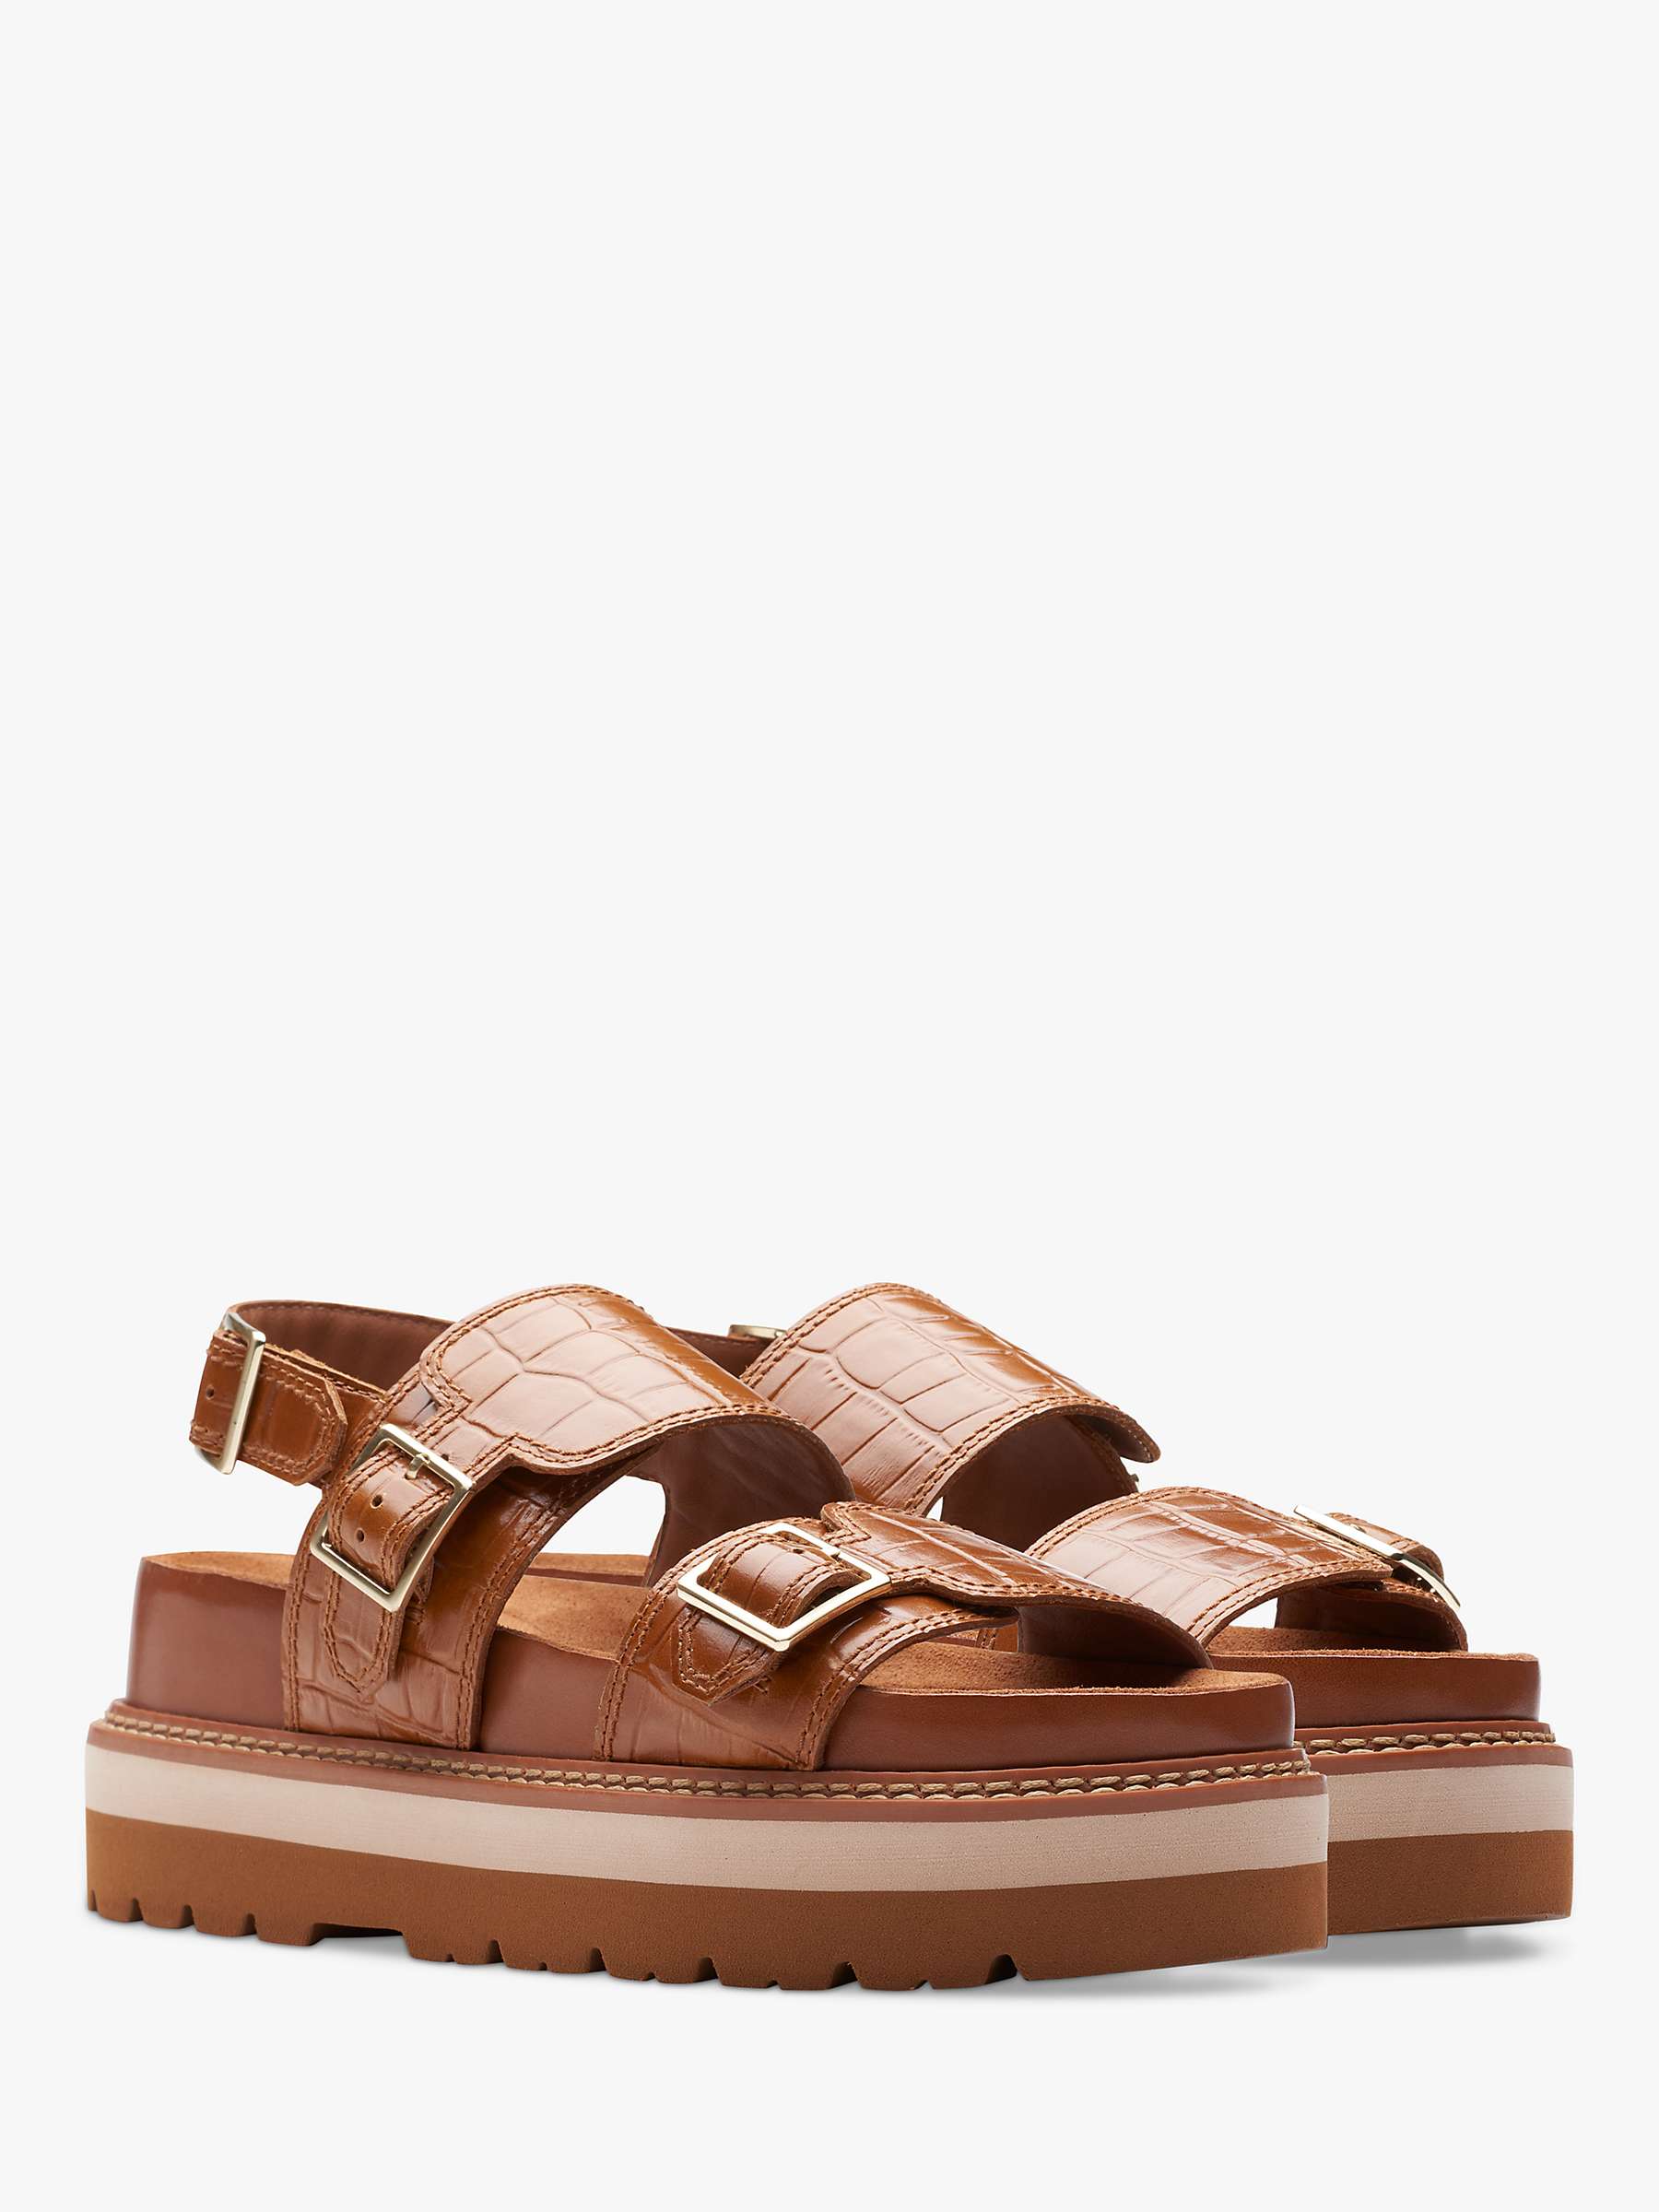 Buy Clarks Orianna Glide Textured Leather Chunky Sole Sandals Online at johnlewis.com